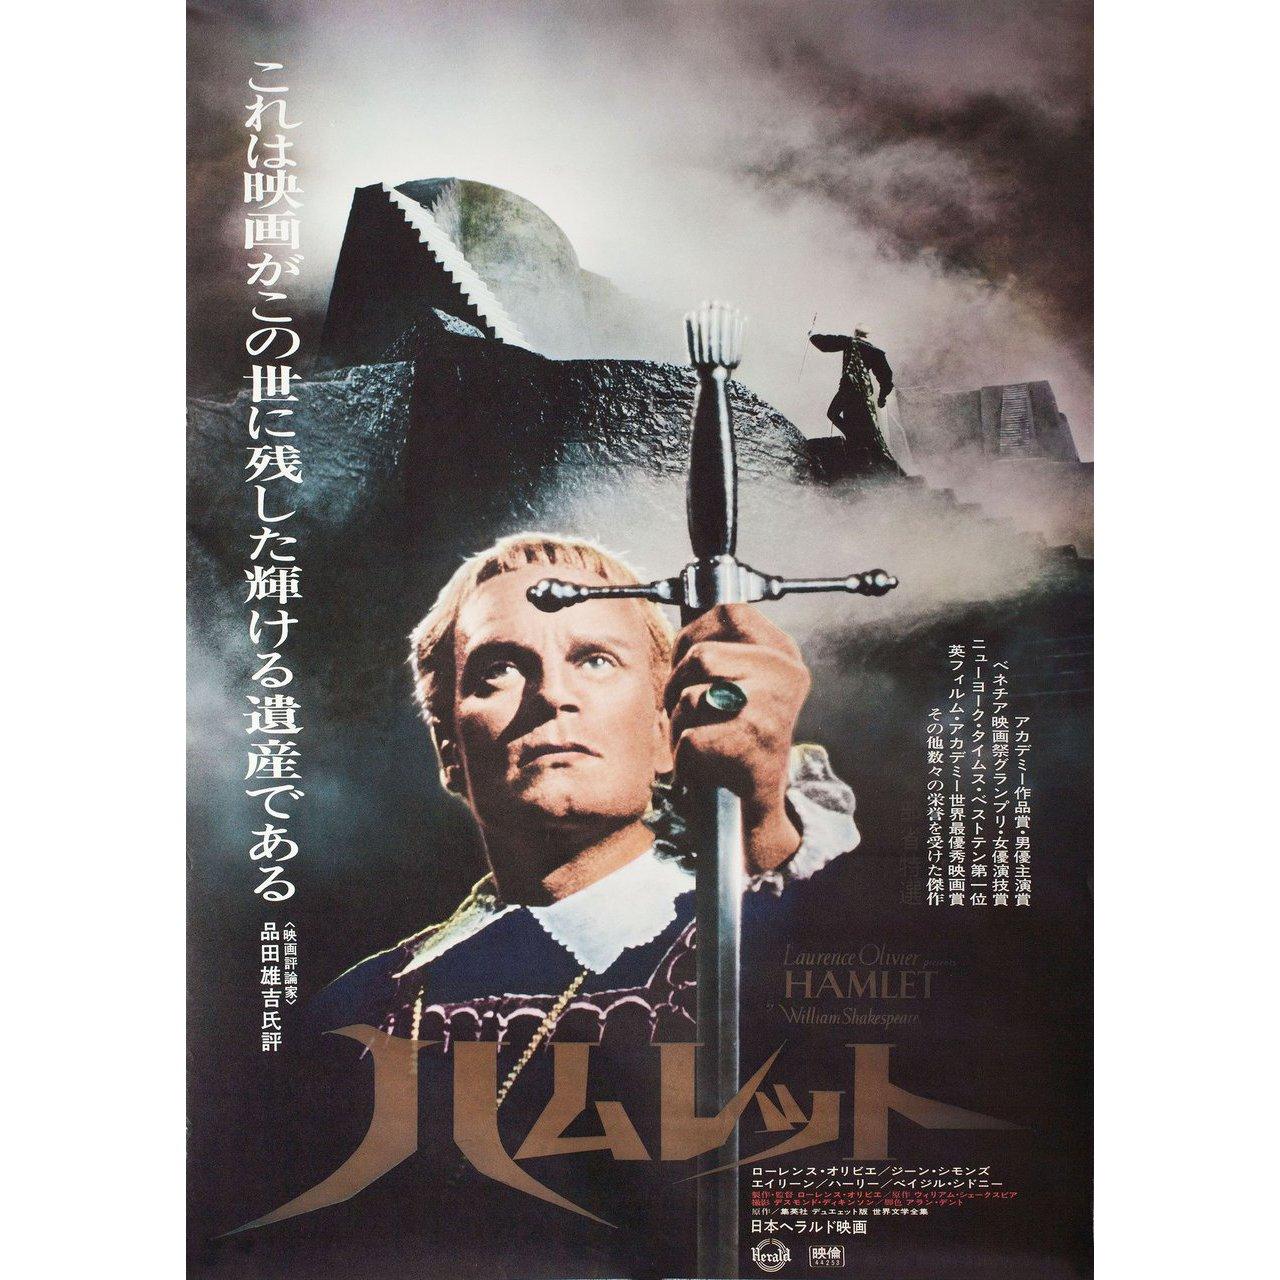 Original 1969 re-release Japanese B2 poster for the 1948 film Hamlet directed by Laurence Olivier with Laurence Olivier / Jean Simmons / John Laurie / Esmond Knight / Anthony Quayle / Niall MacGinnis. Very good-fine condition, rolled. Please note: